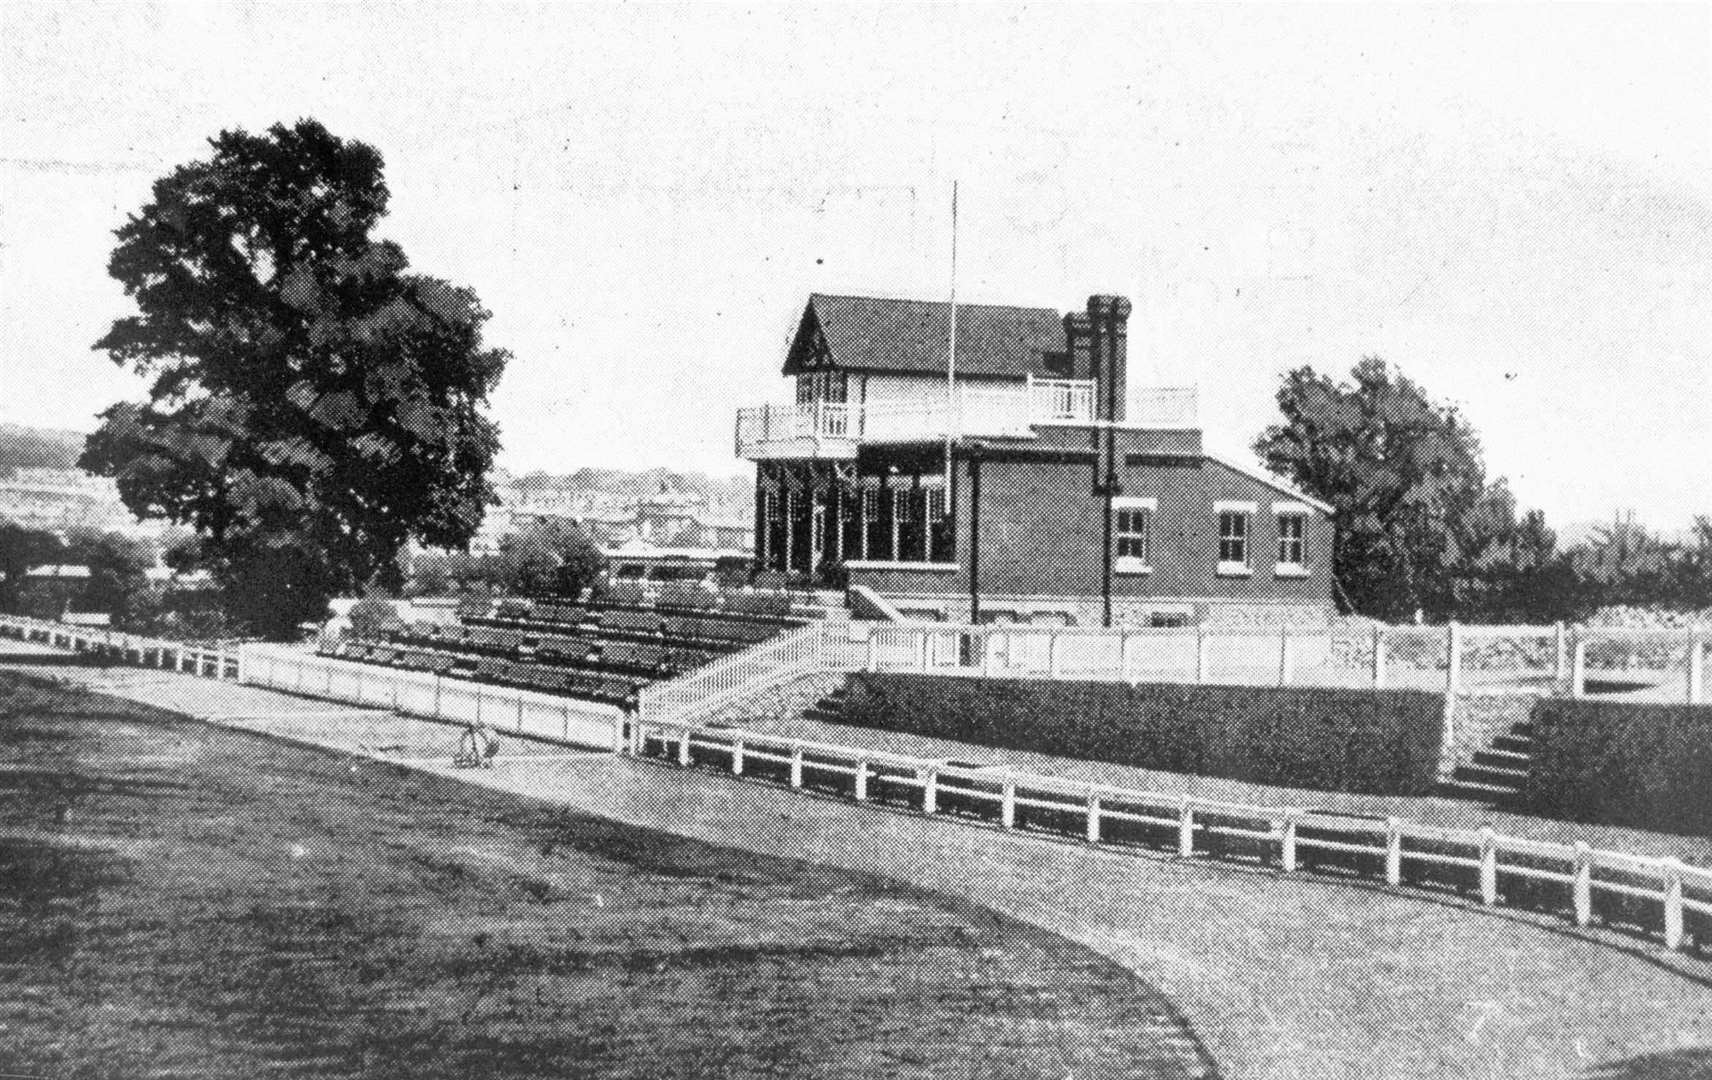 The Athletic Ground in London Road, home of Maidstone United, pictured in its pre-war days